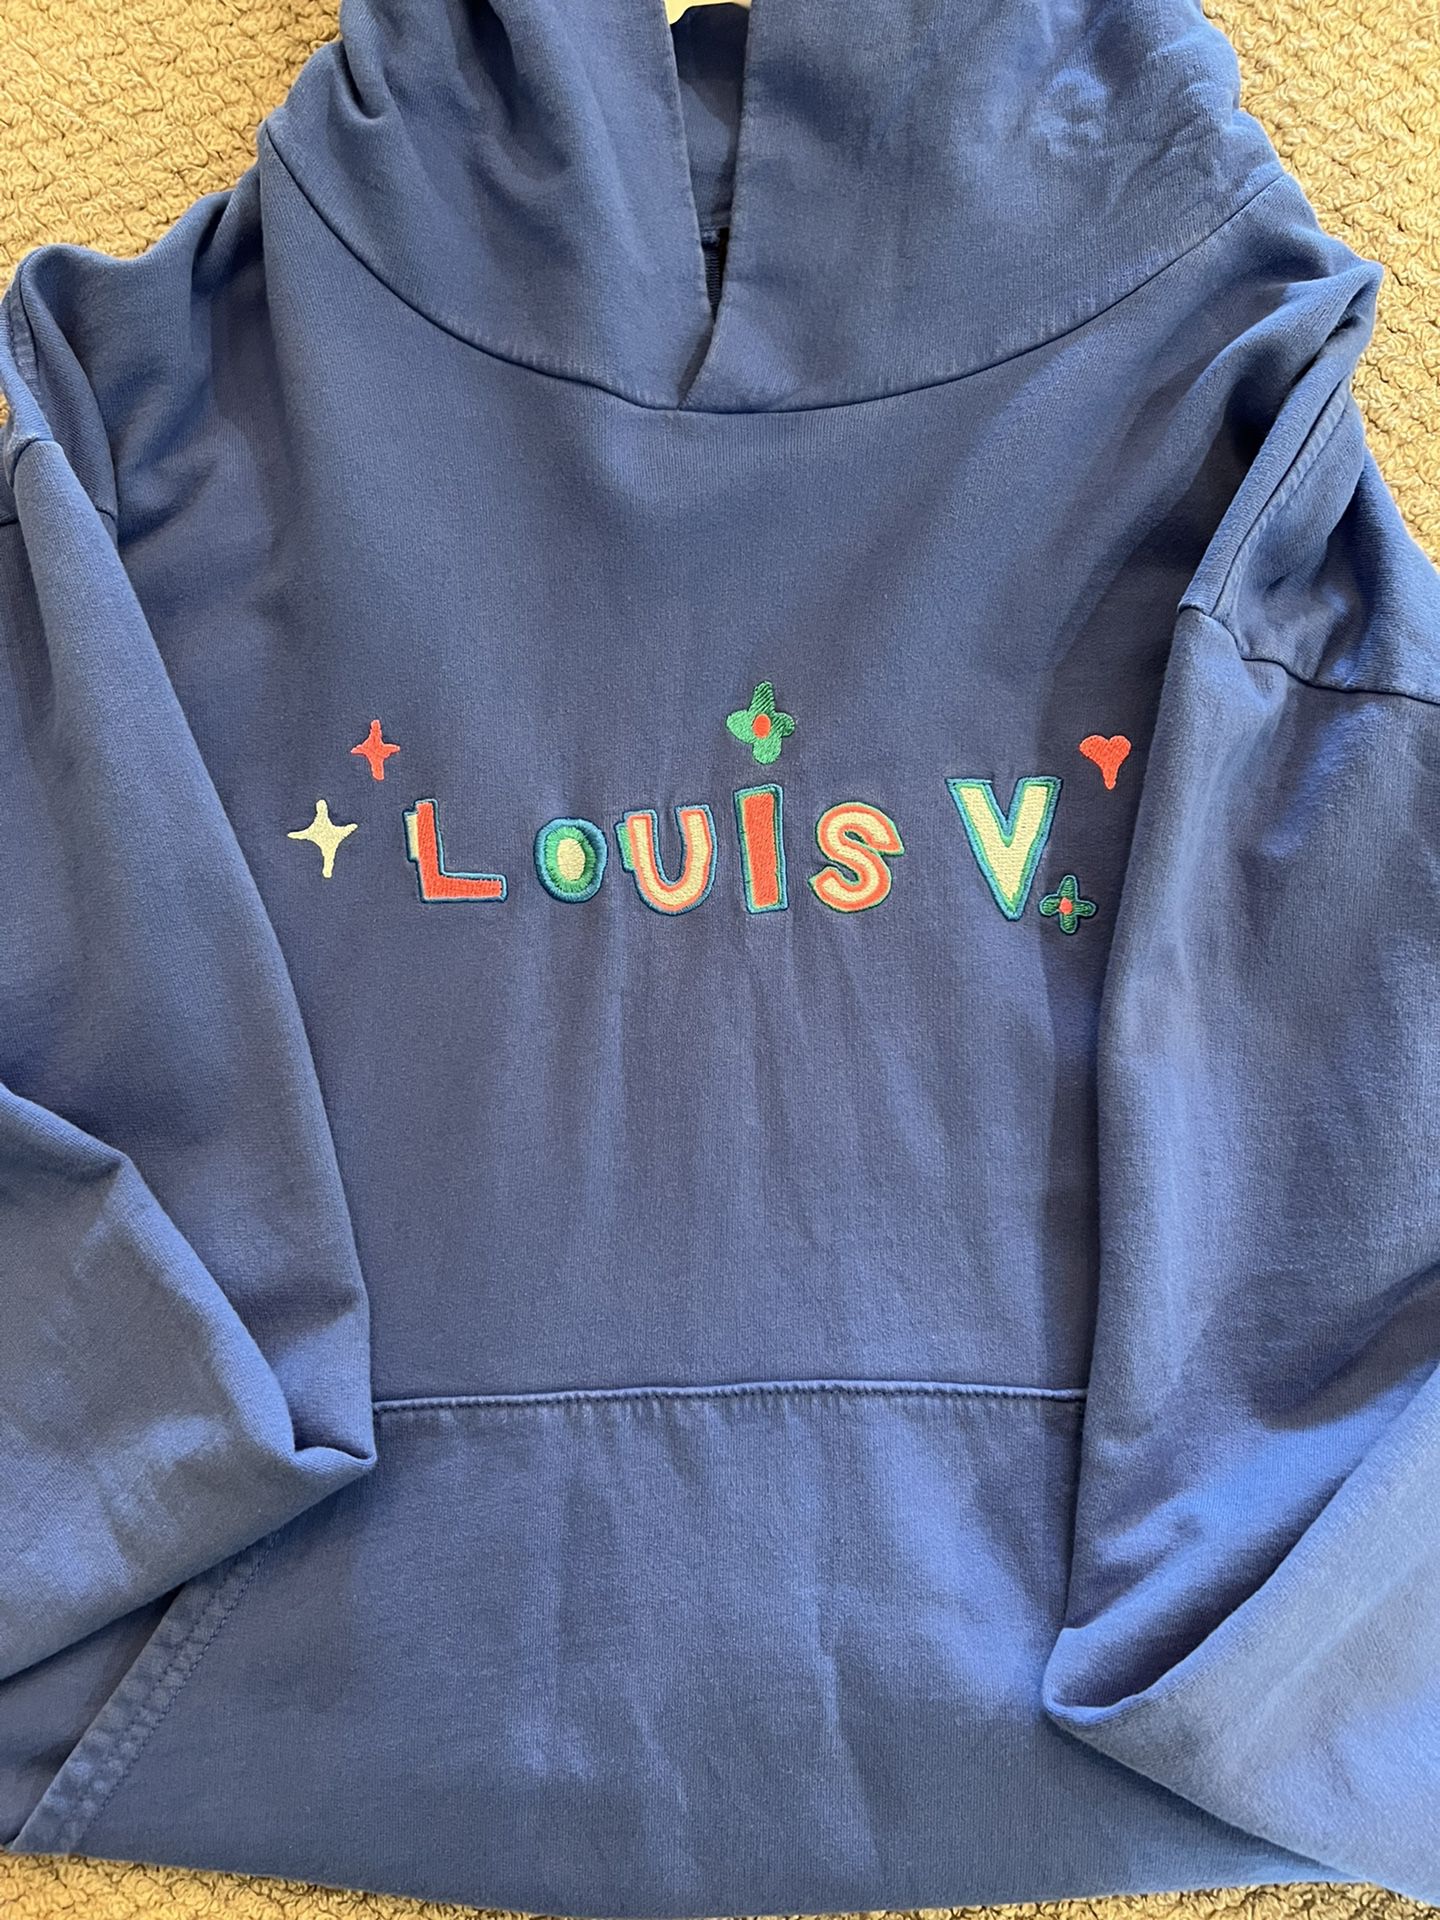 Louis Vuitton Hoodies - Up to 70% off at Tradesy